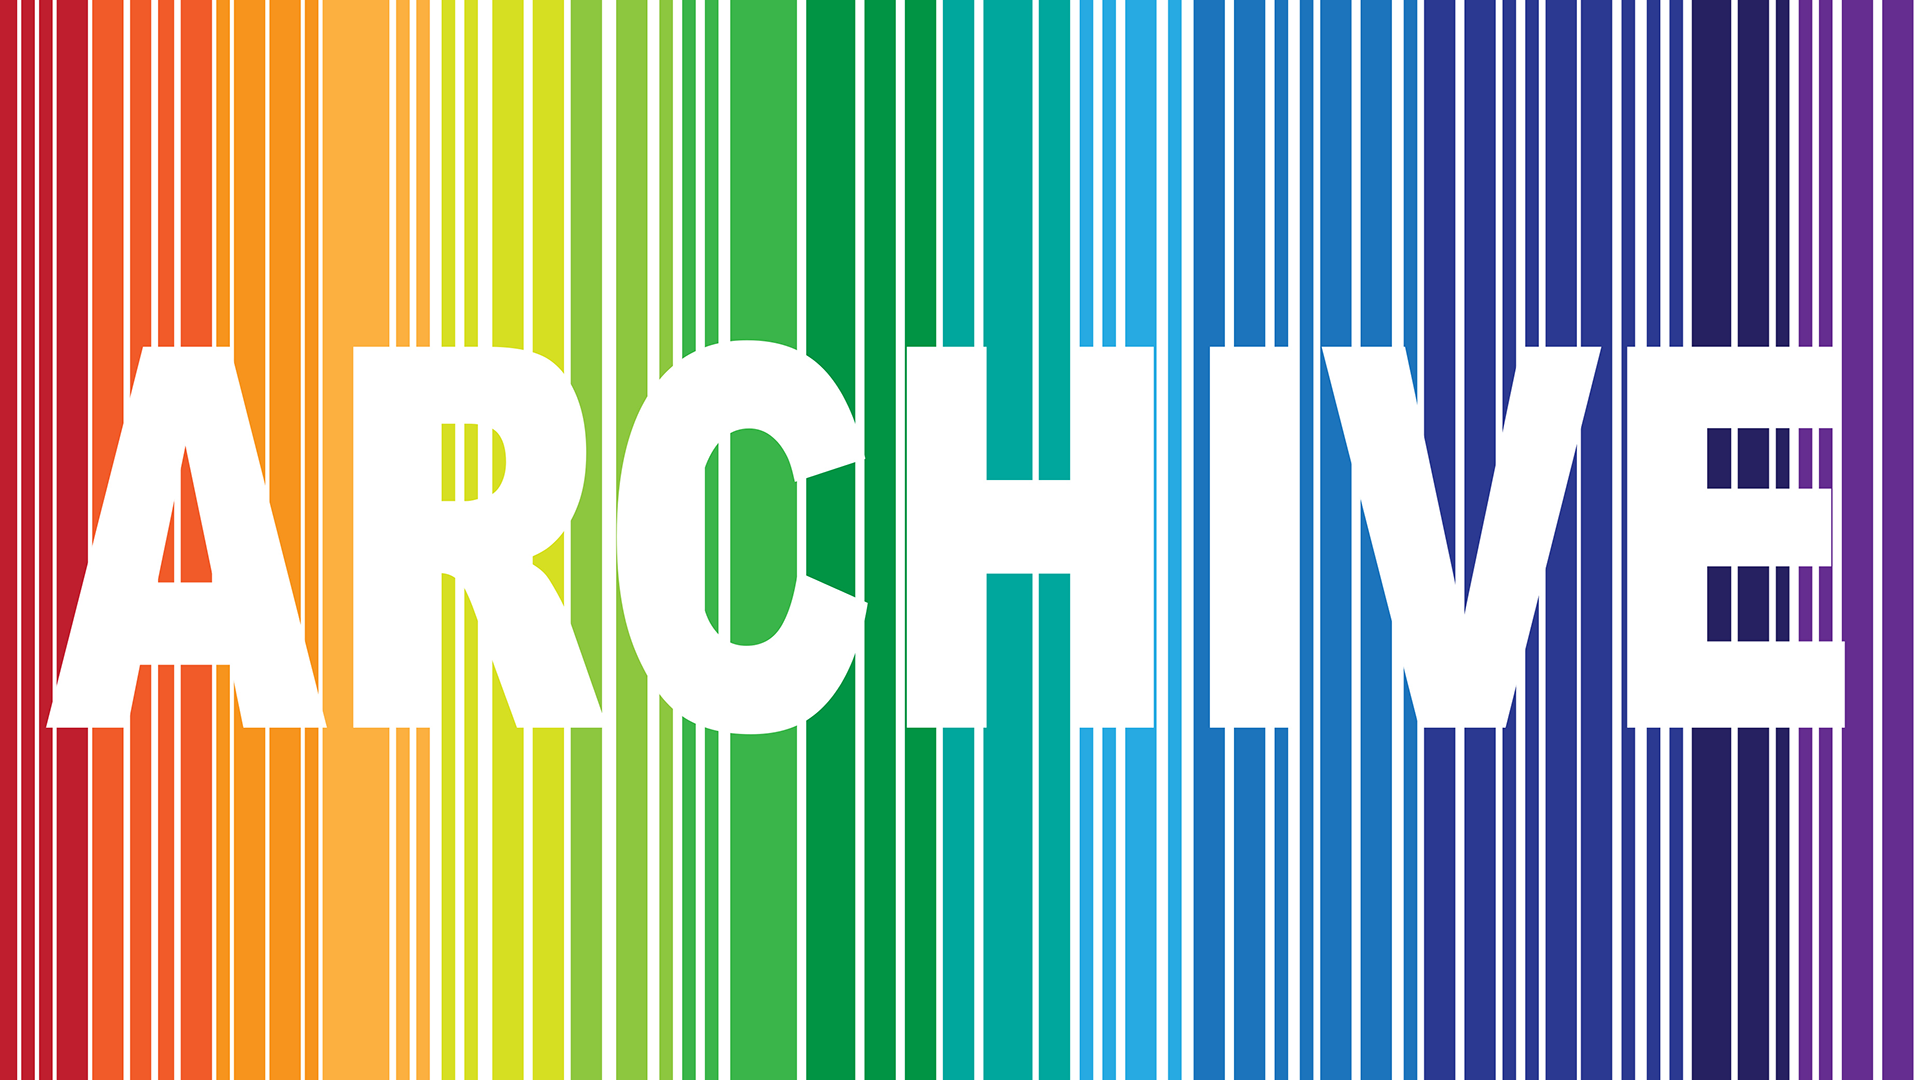 A rainbow background that with the word "ARCHIVE" overlaid in white block printing